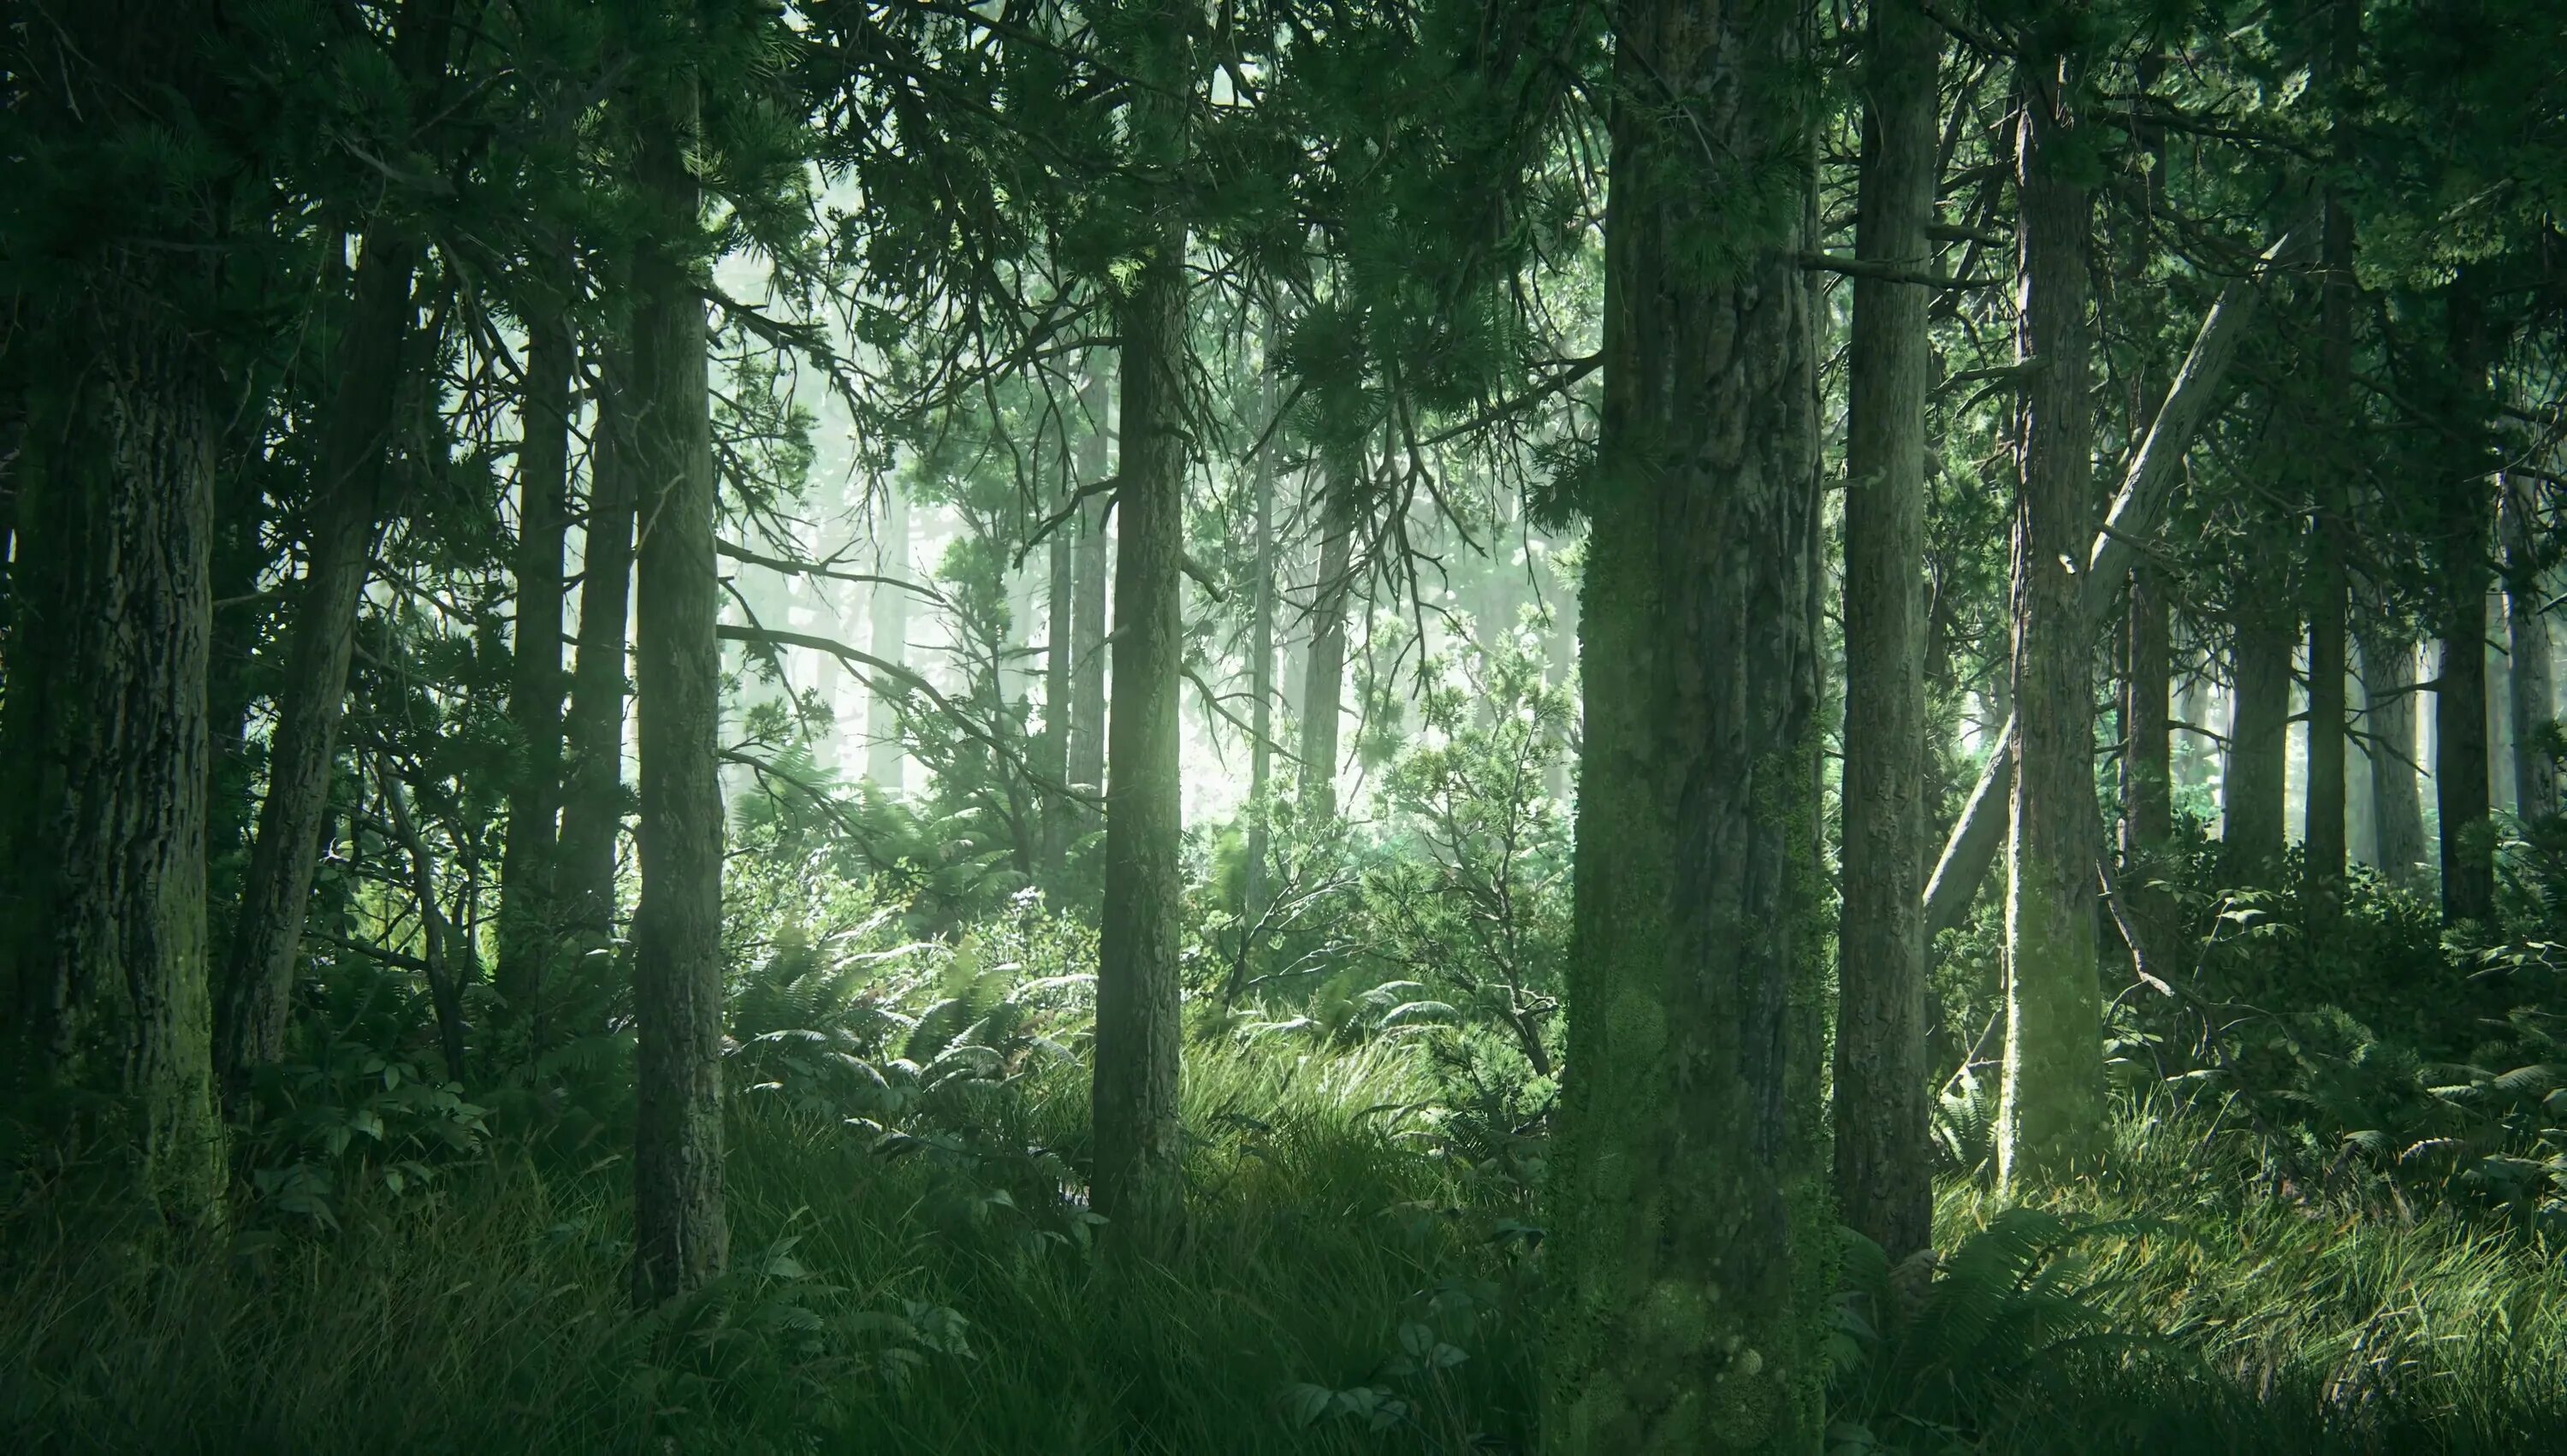 Forest 2 c. The last of us 2 лес. The last of us 2 screenshots лес. The last of us 2 лес на рабочий стол. Фон леса.